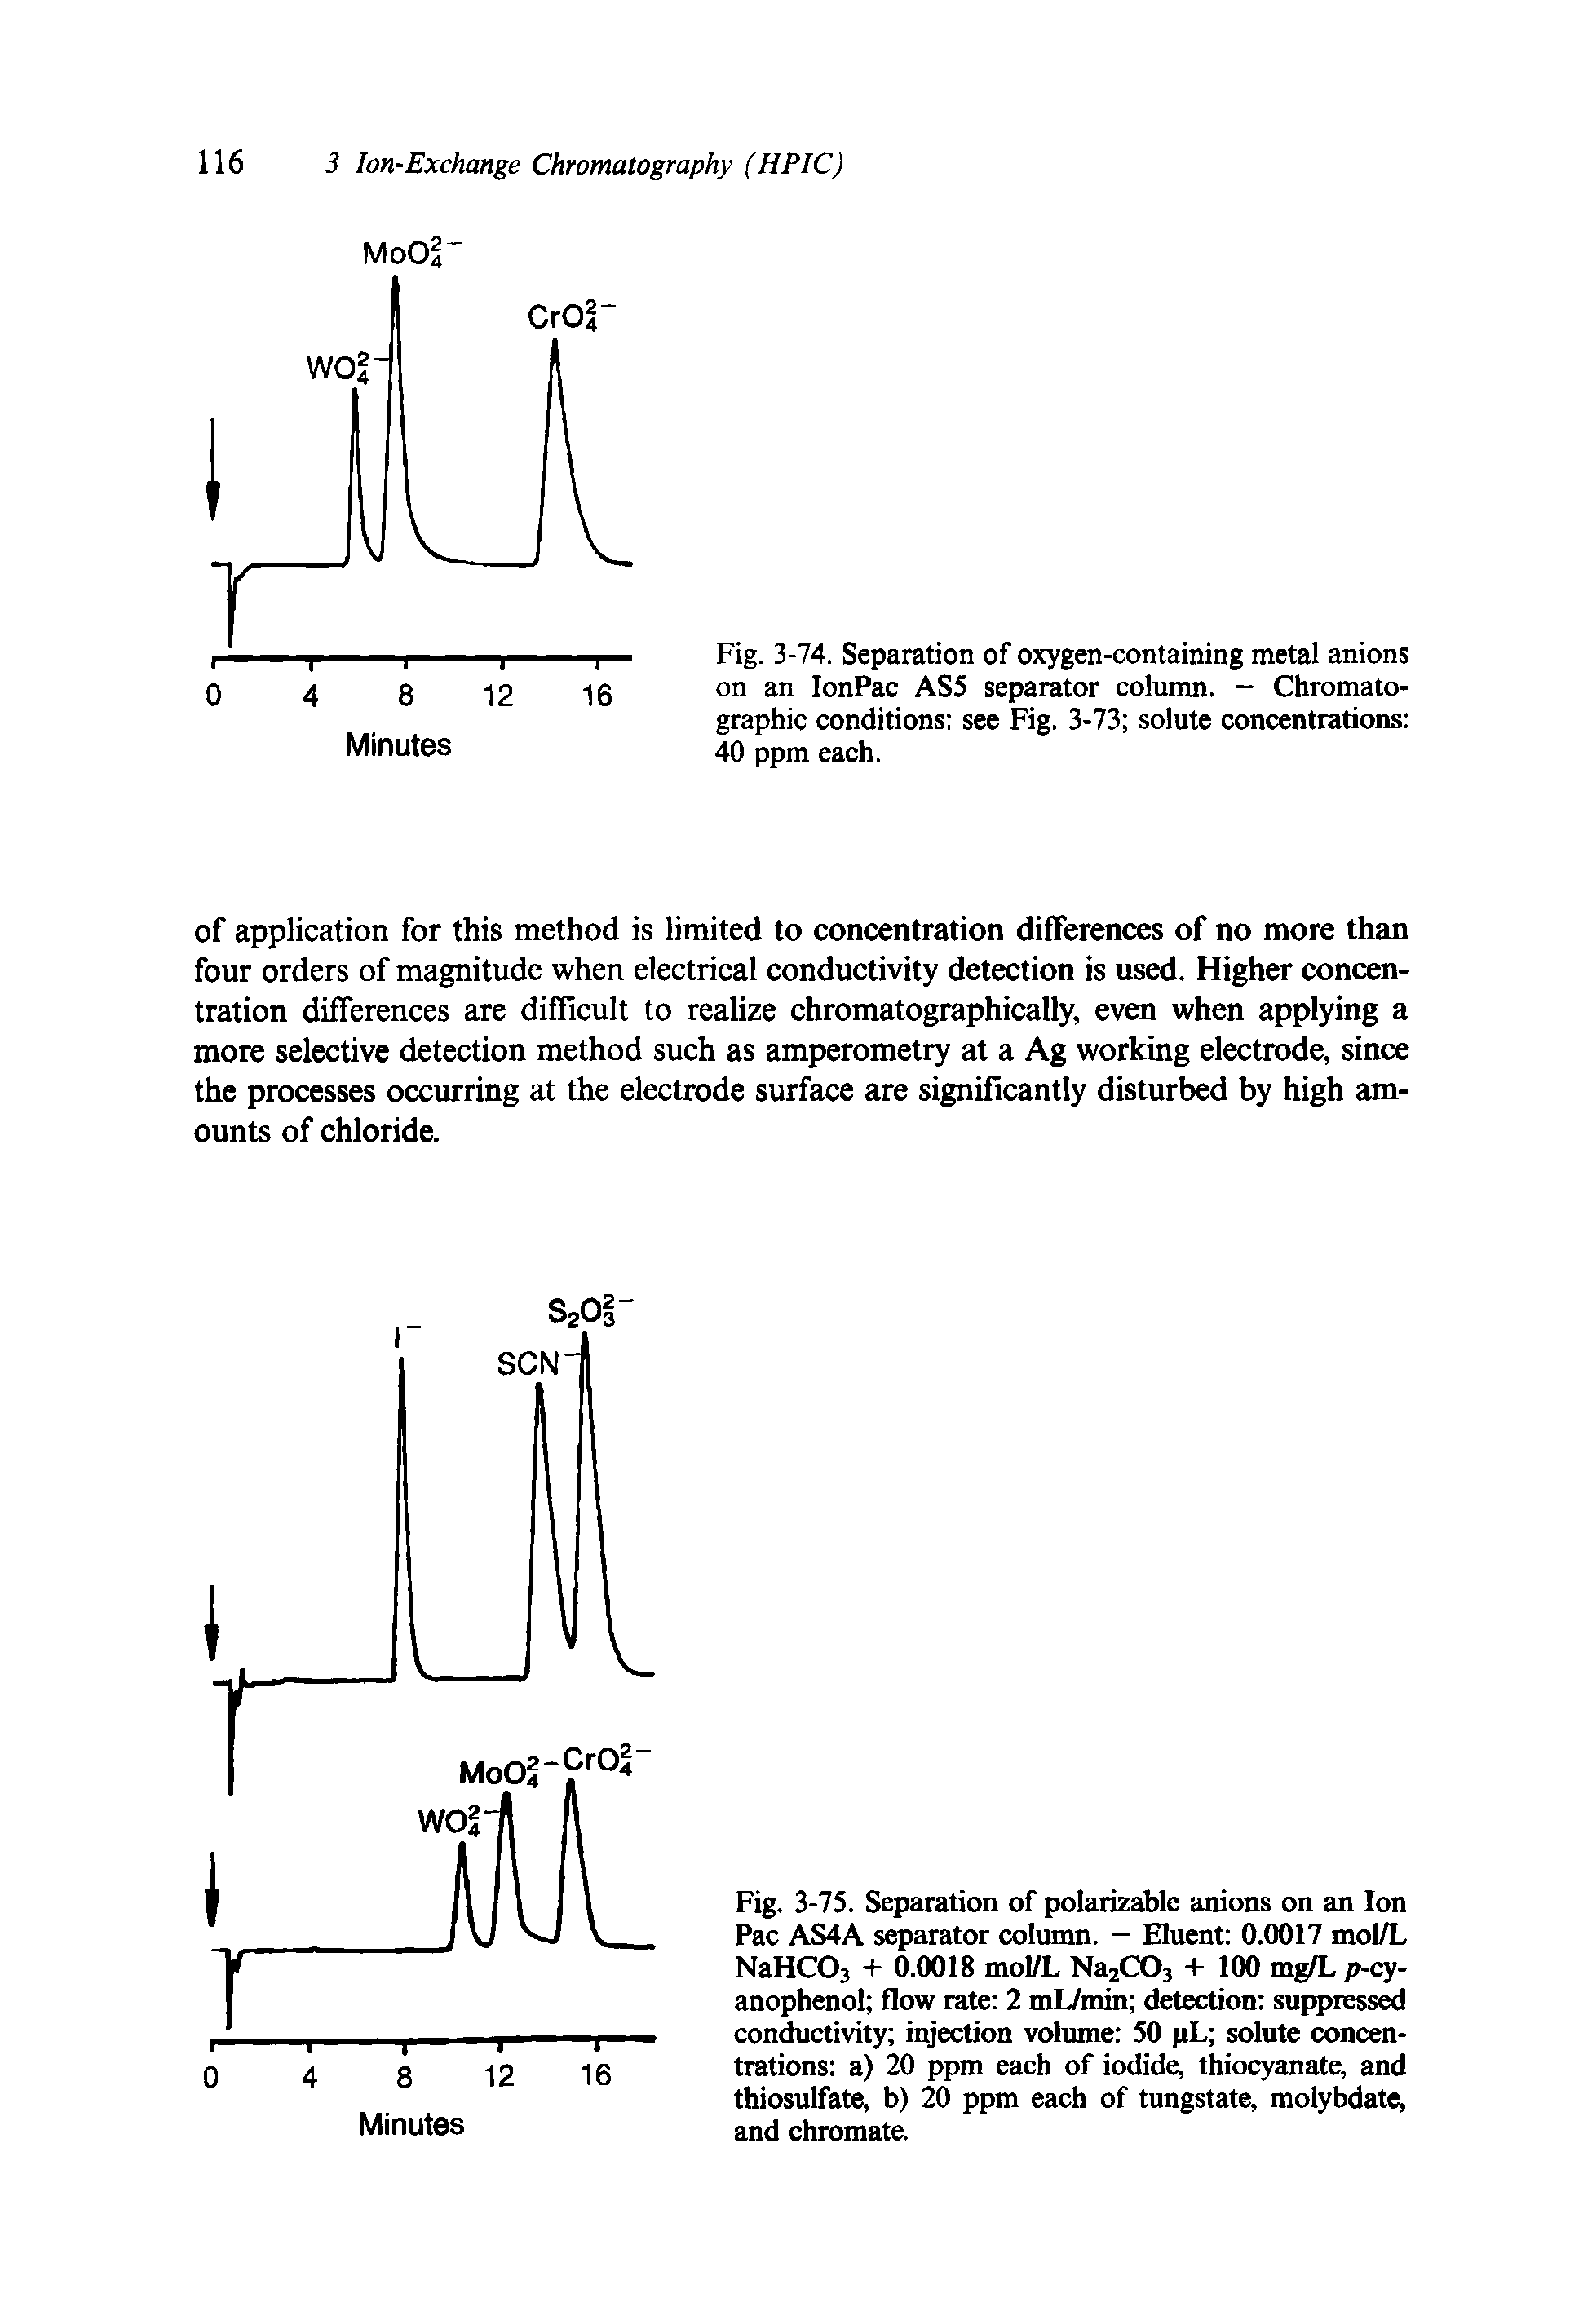 Fig. 3-75. Separation of polarizable anions on an Ion Pac AS4A separator column. - Eluent 0.0017 mol/L NaHC03 + 0.0018 mol/L Na2C03 + 100 mg/L p-cy-anophenol flow rate 2 mL/min detection suppressed conductivity injection volume 50 pL solute concentrations a) 20 ppm each of iodide, thiocyanate, and thiosulfate, b) 20 ppm each of tungstate, molybdate, and chromate.